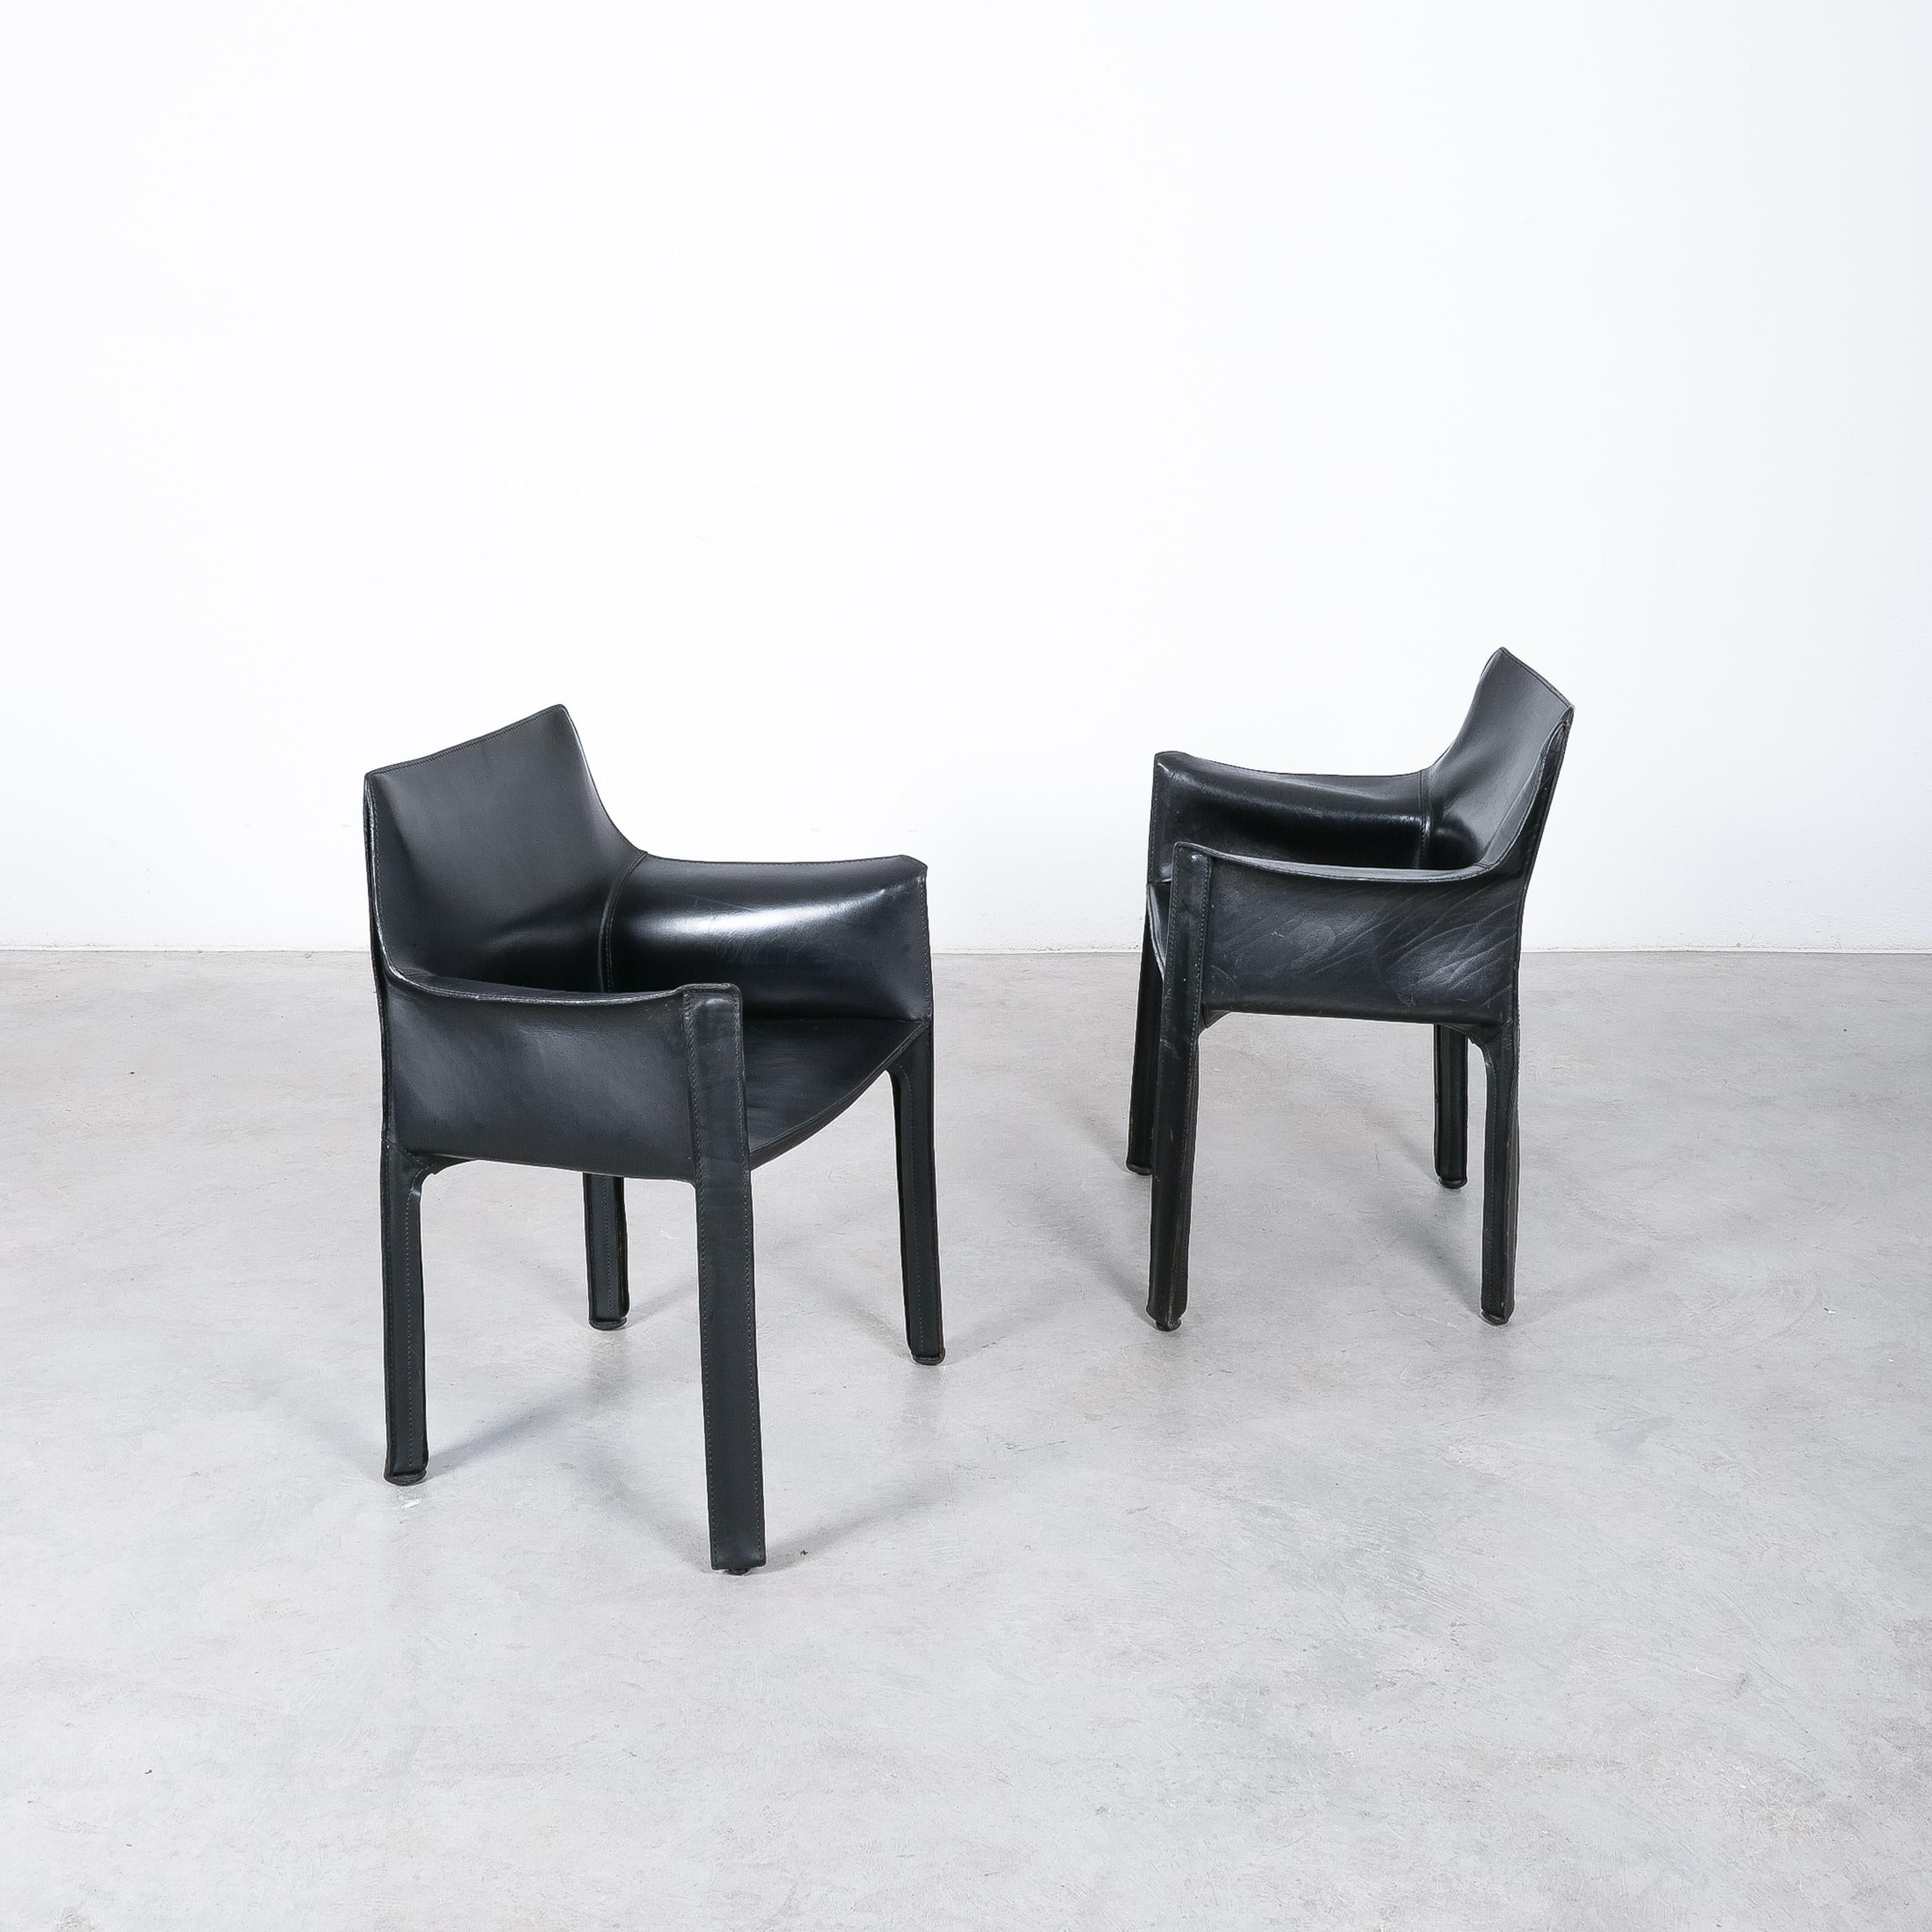 Post-Modern Mario Bellini Cassina Cab 412 + Cab 413- 8 Black Leather Dining Chairs, 1980